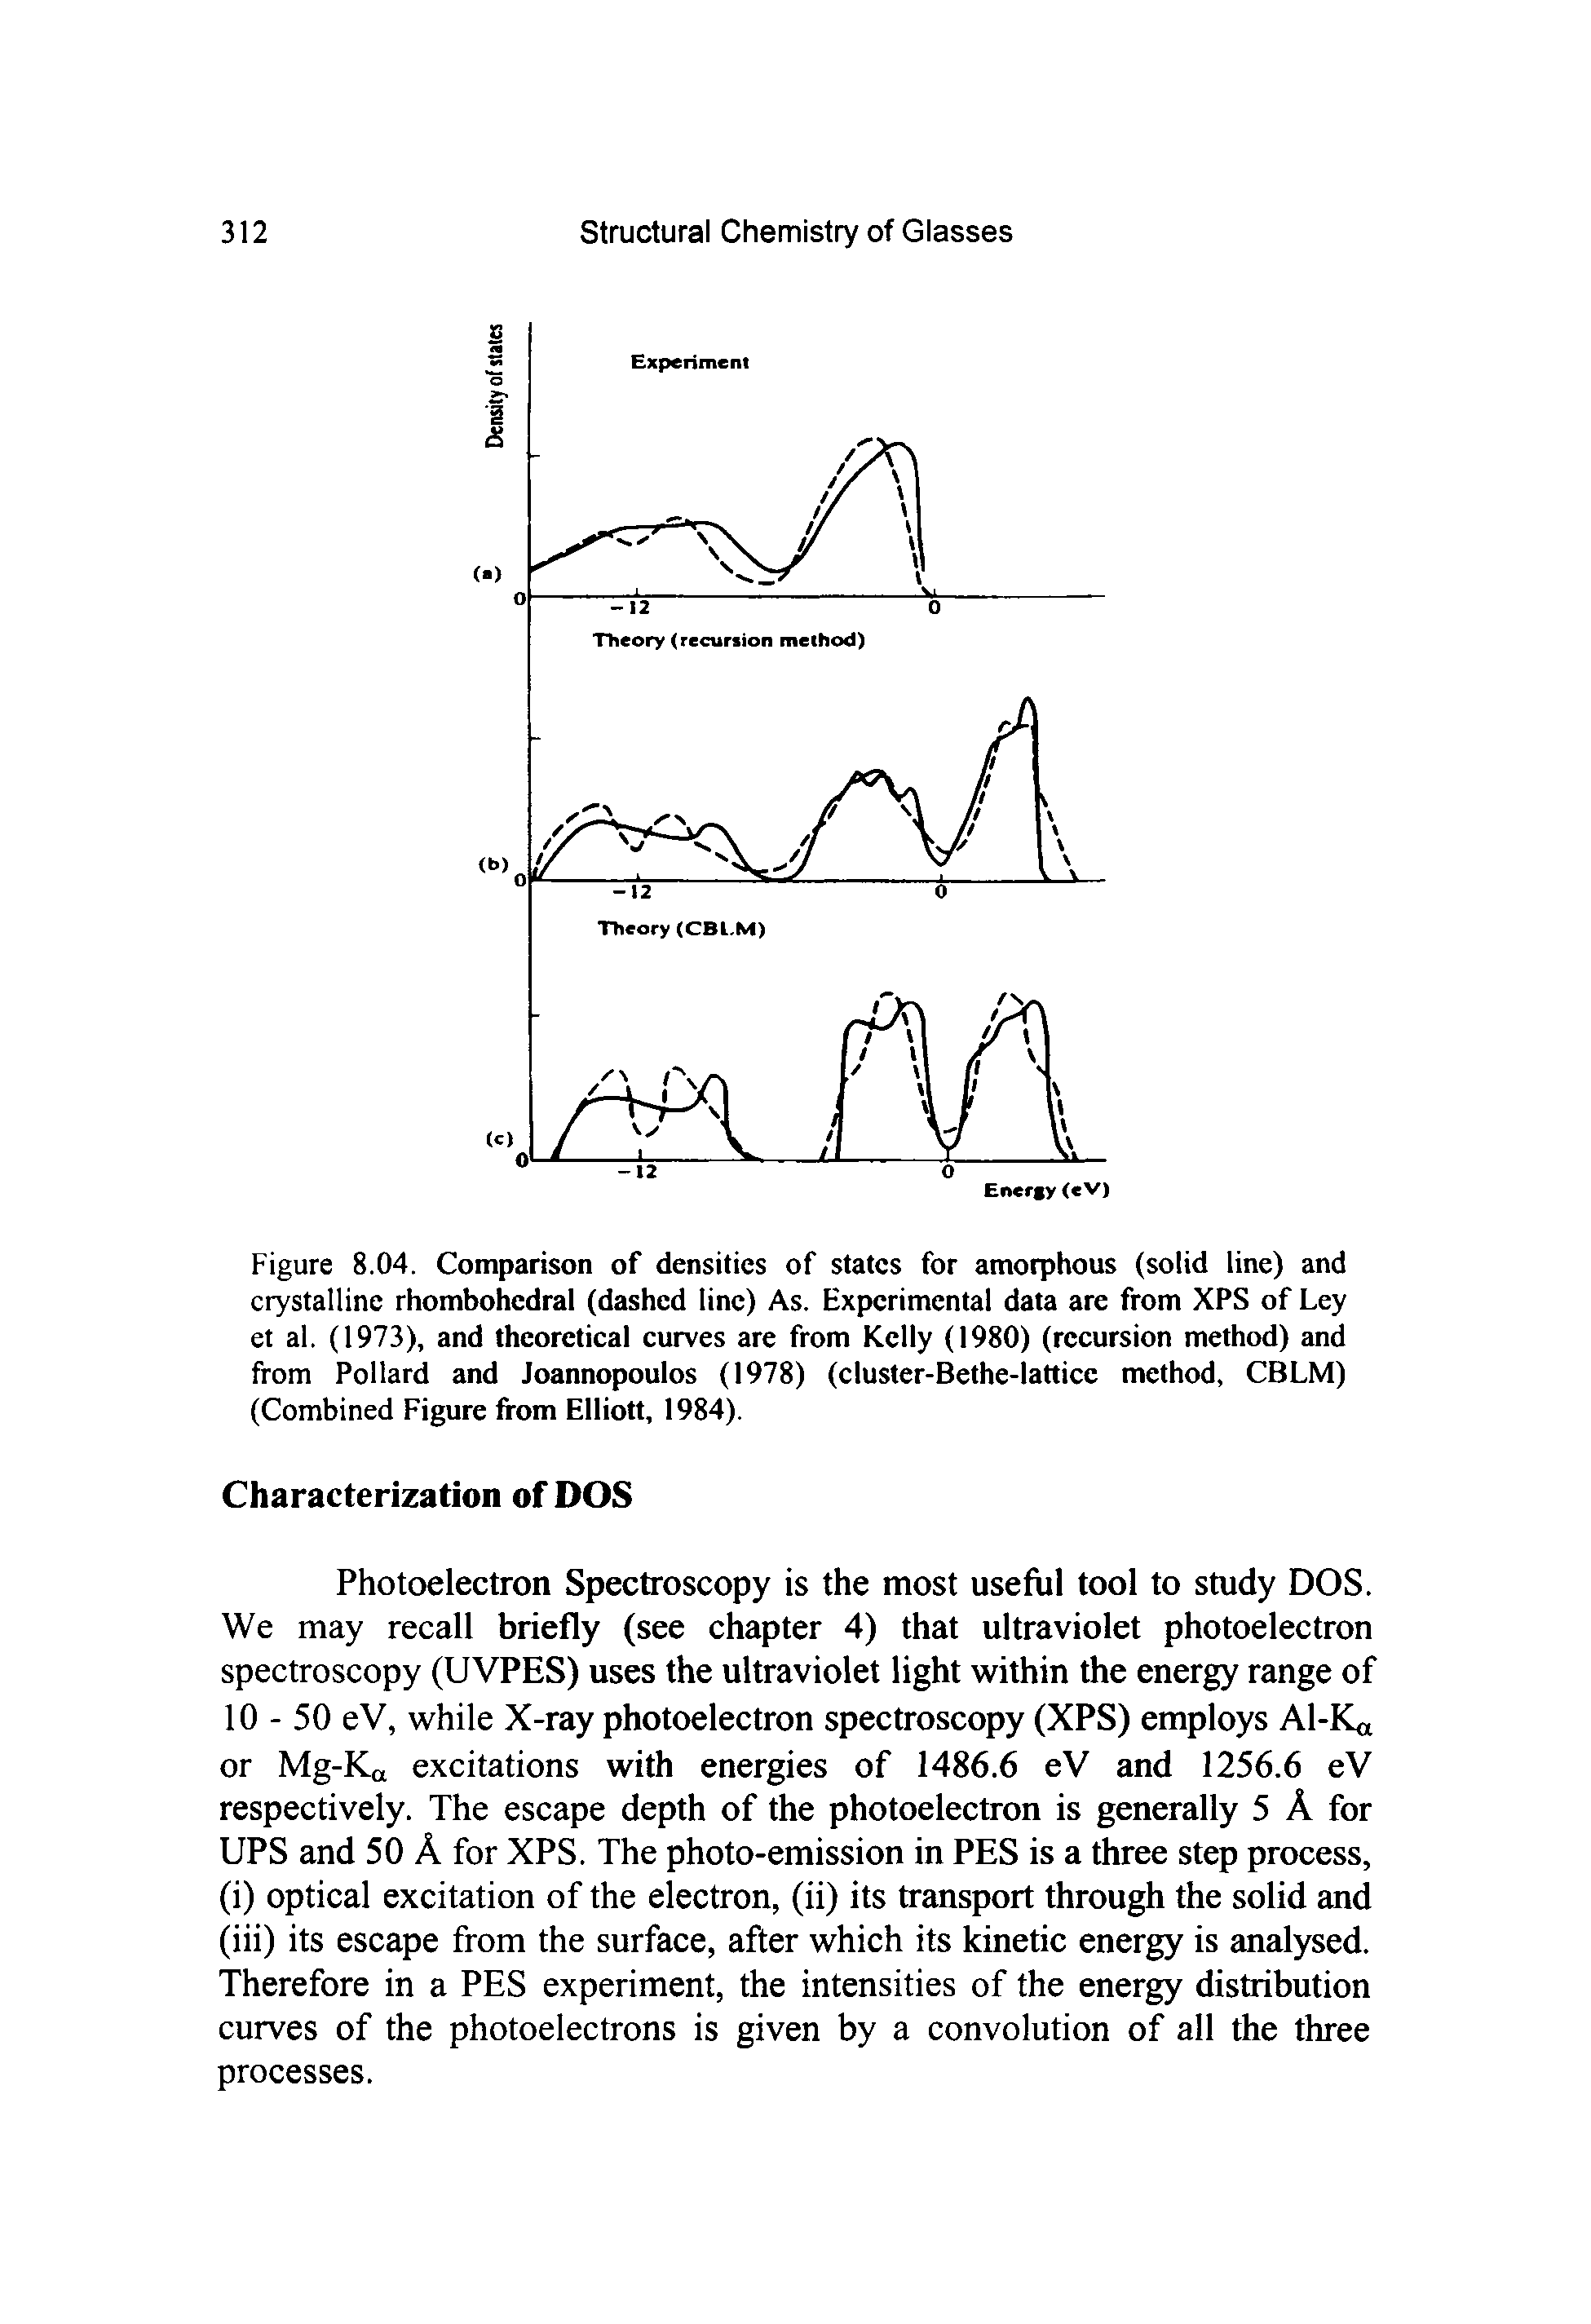 Figure 8.04. Comparison of densities of states for amorphous (solid line) and crystalline rhombohedral (dashed line) As. Experimental data are from XPS of Ley et al. (1973), and theoretical curves are from Kelly (1980) (recursion method) and from Pollard and Joannopoulos (1978) (cluster-Bethe-lattice method, CBLM) (Combined Figure from Elliott, 1984).